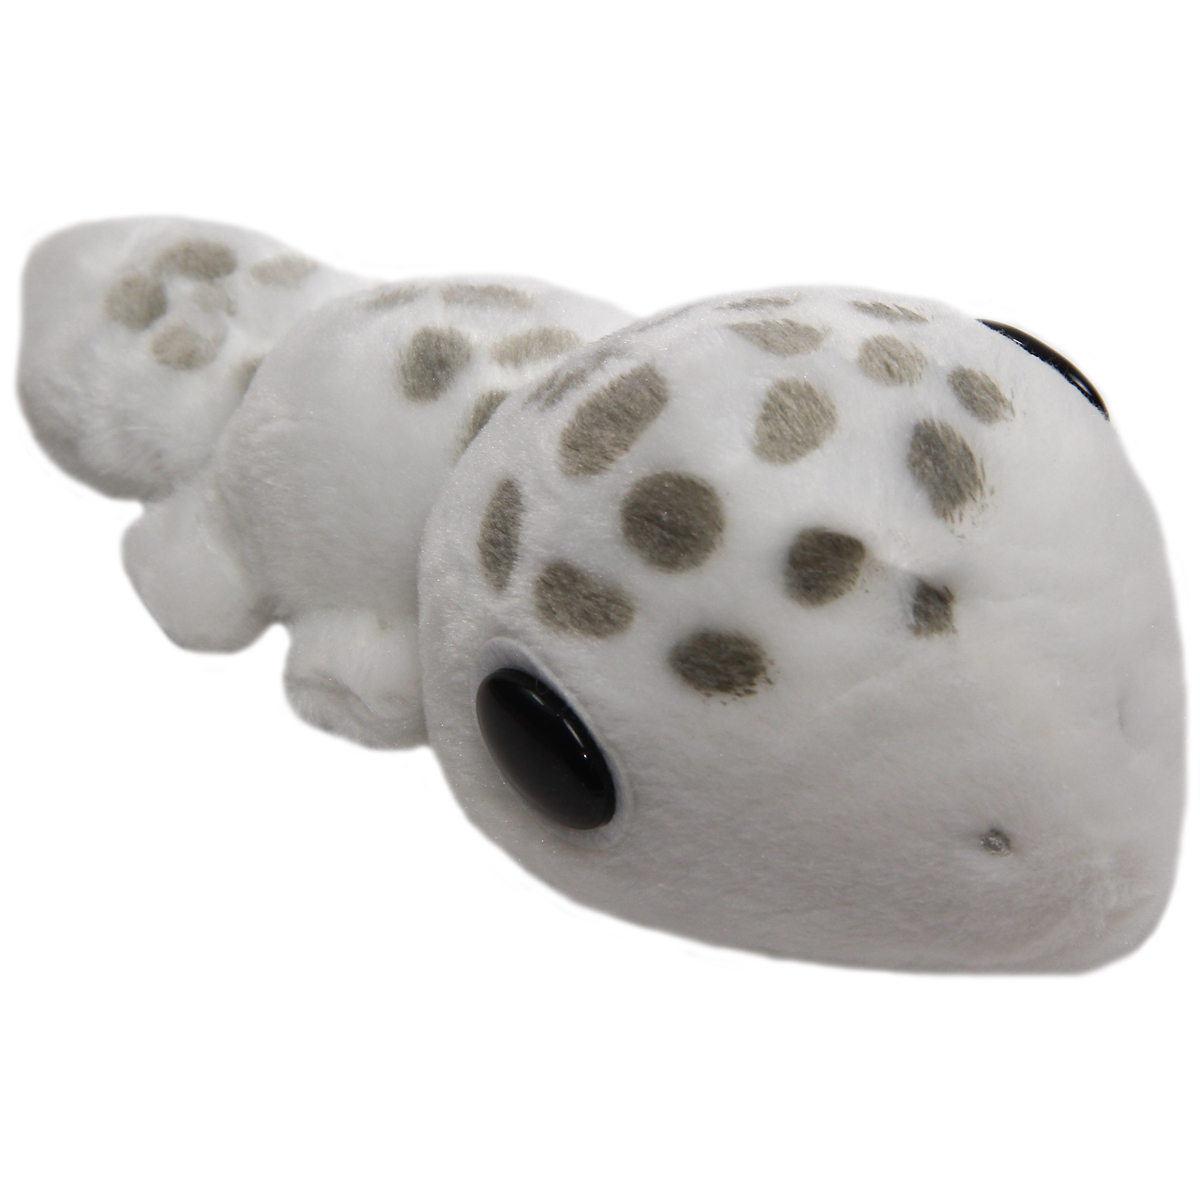 Leopard Gecko Plushie Super Soft Squishy Stuffed Animal Toy White Size 8 Inches